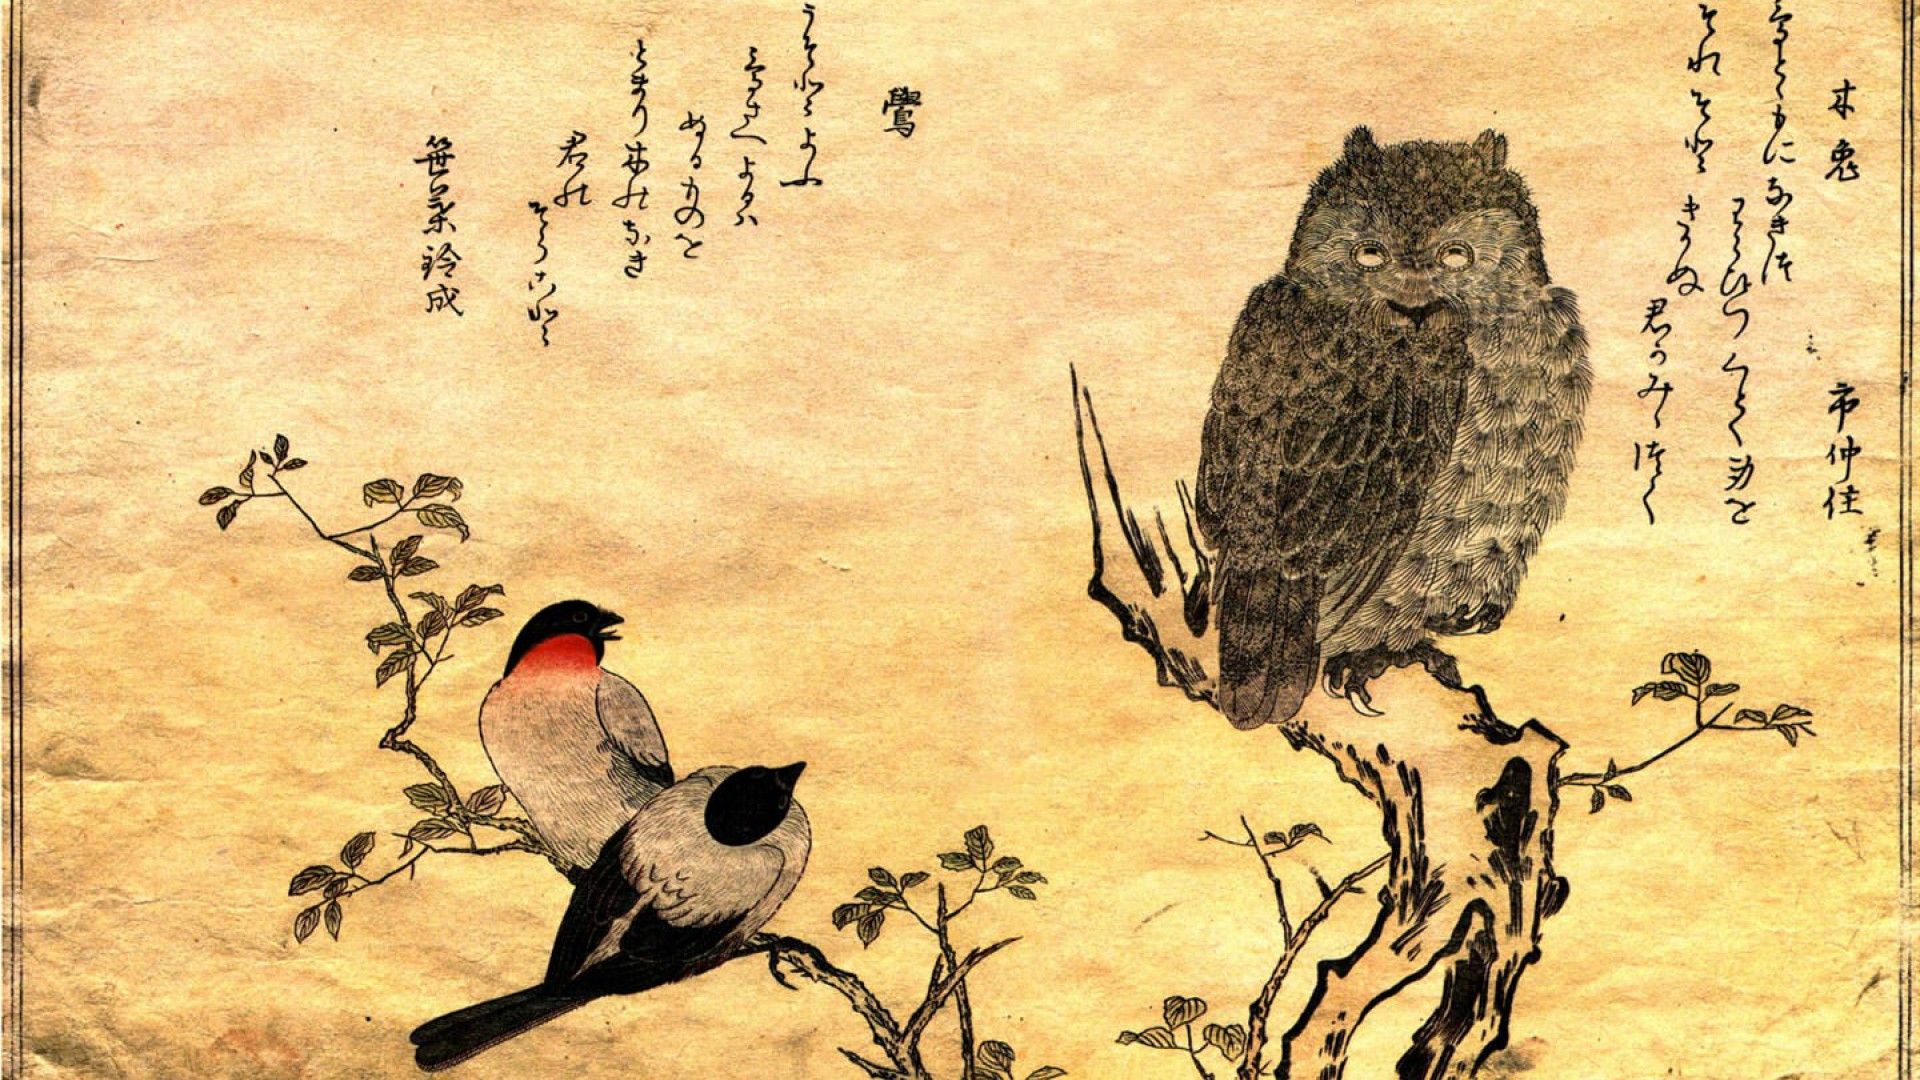 Japanese Traditional Paintings HD Wallpapers - Desktop Backgrounds